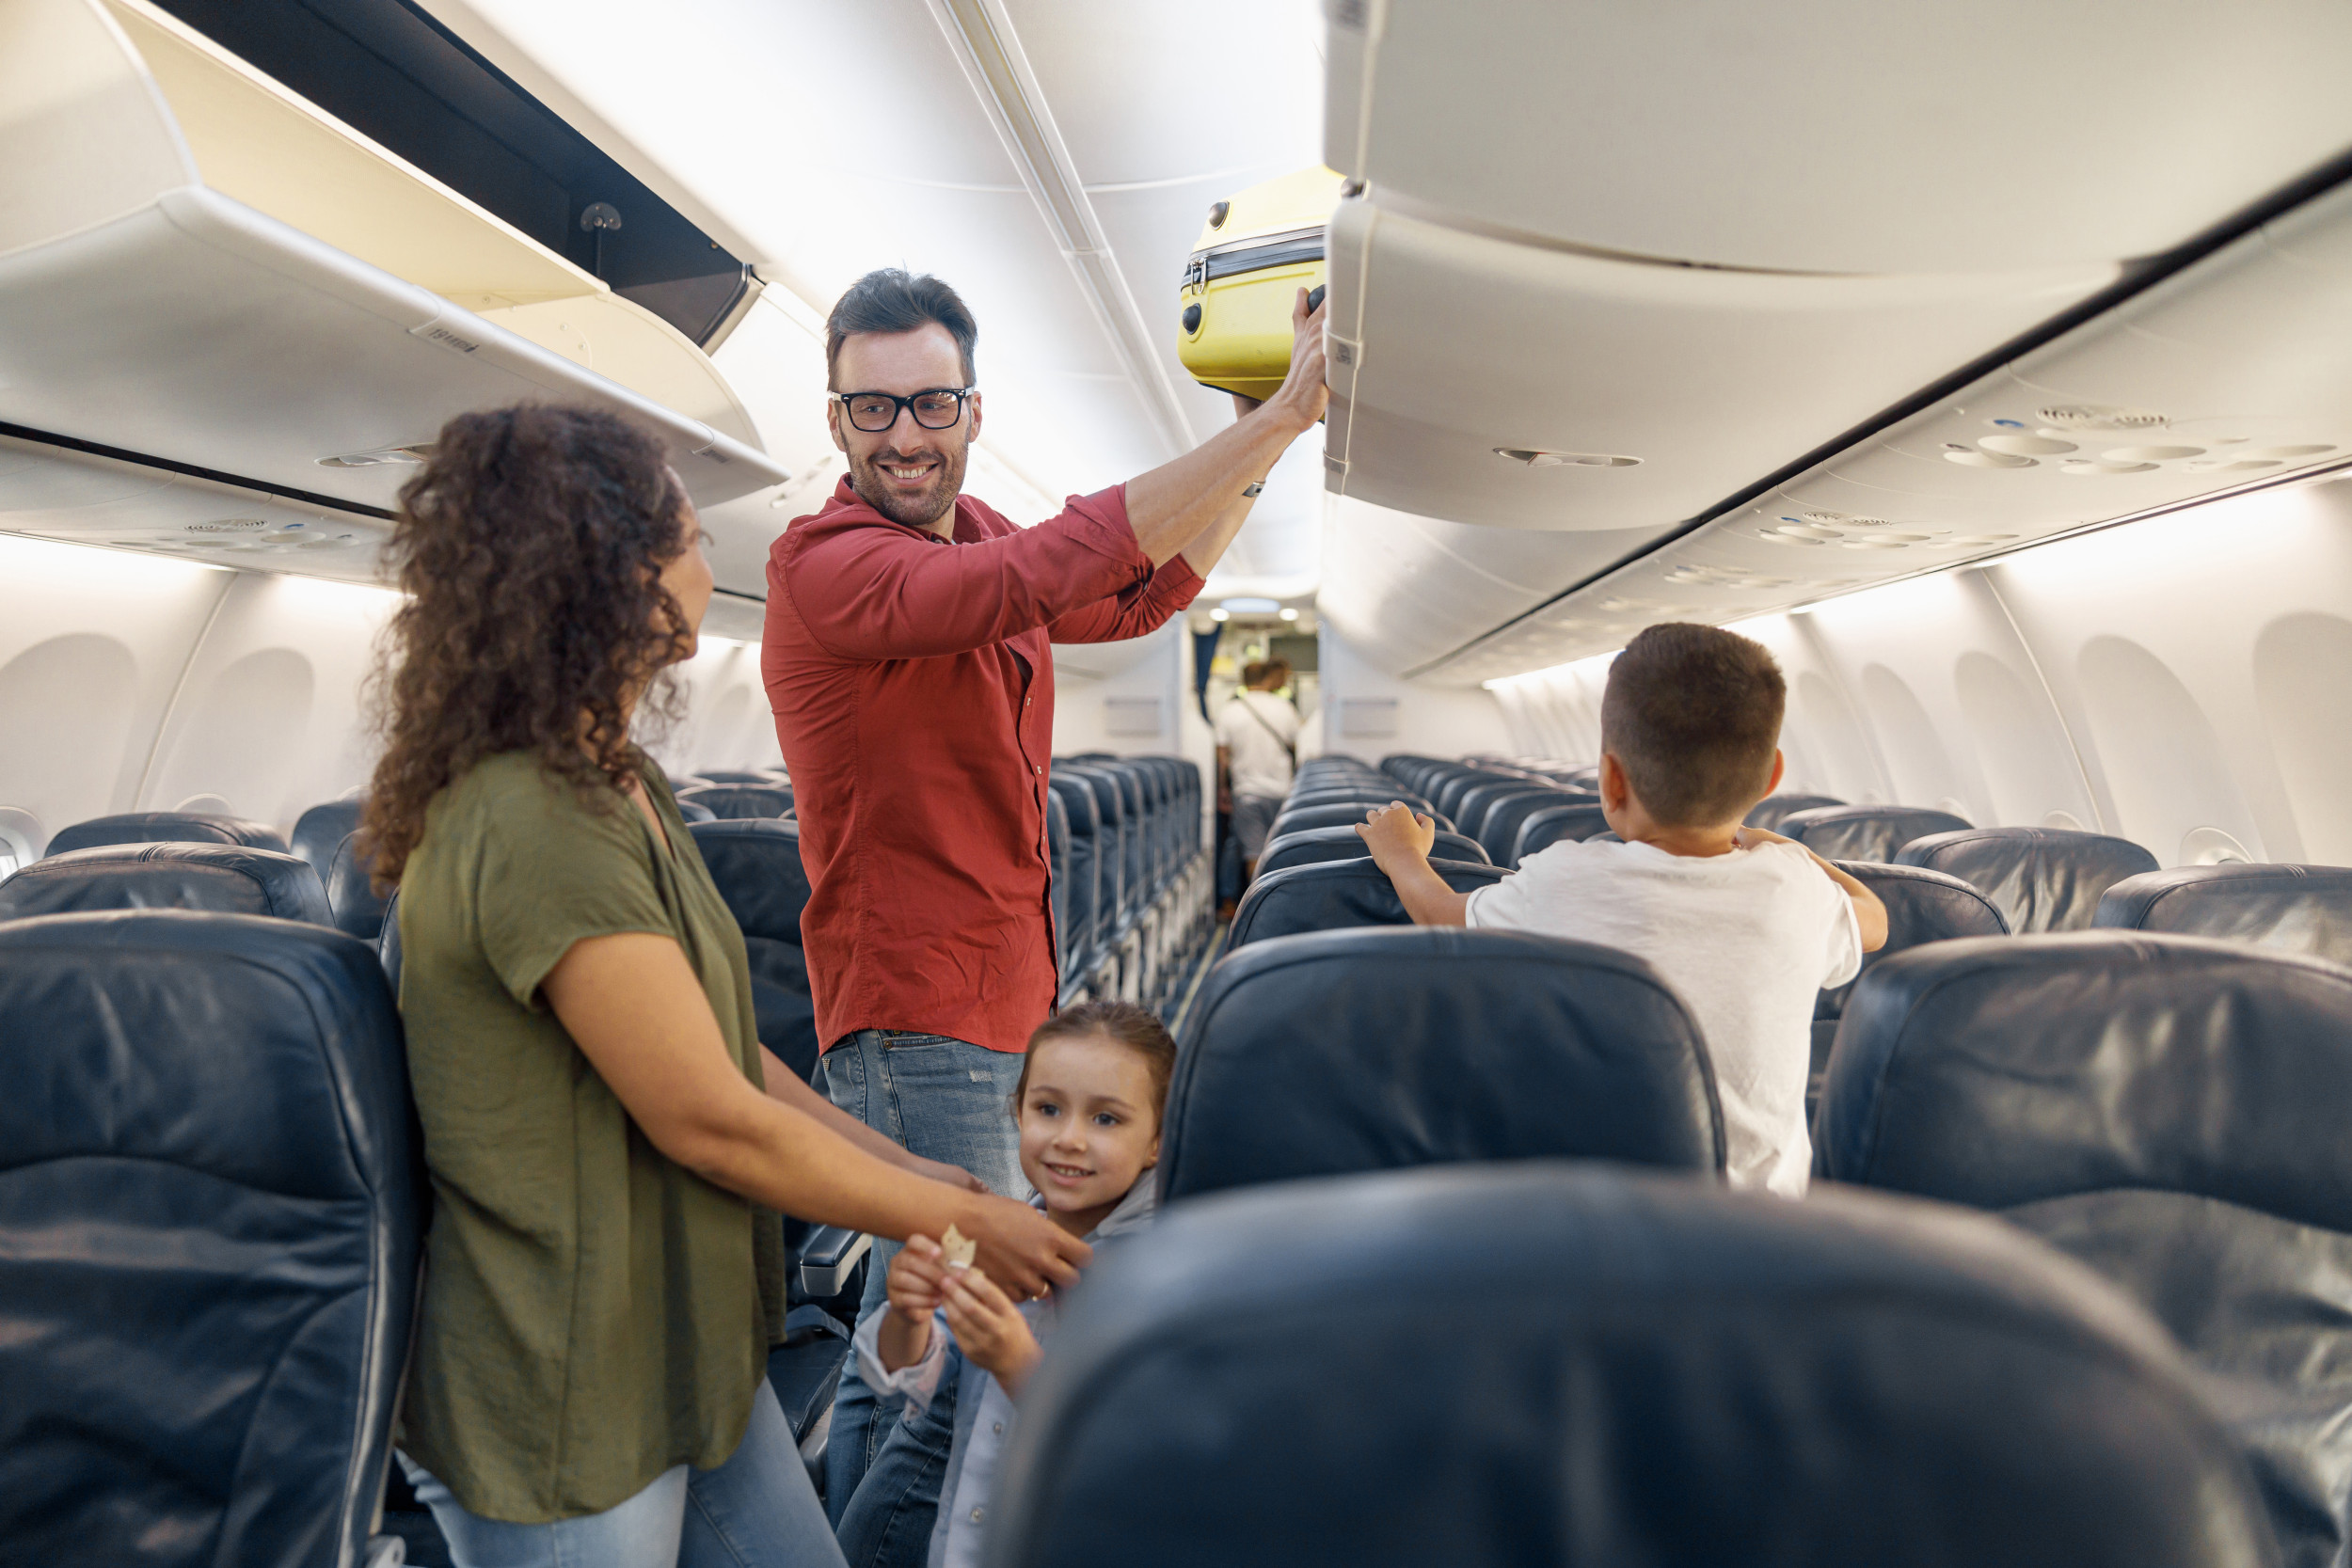 Frantic' Parents Asking Plane Passenger to Give Seat to Child Dragged